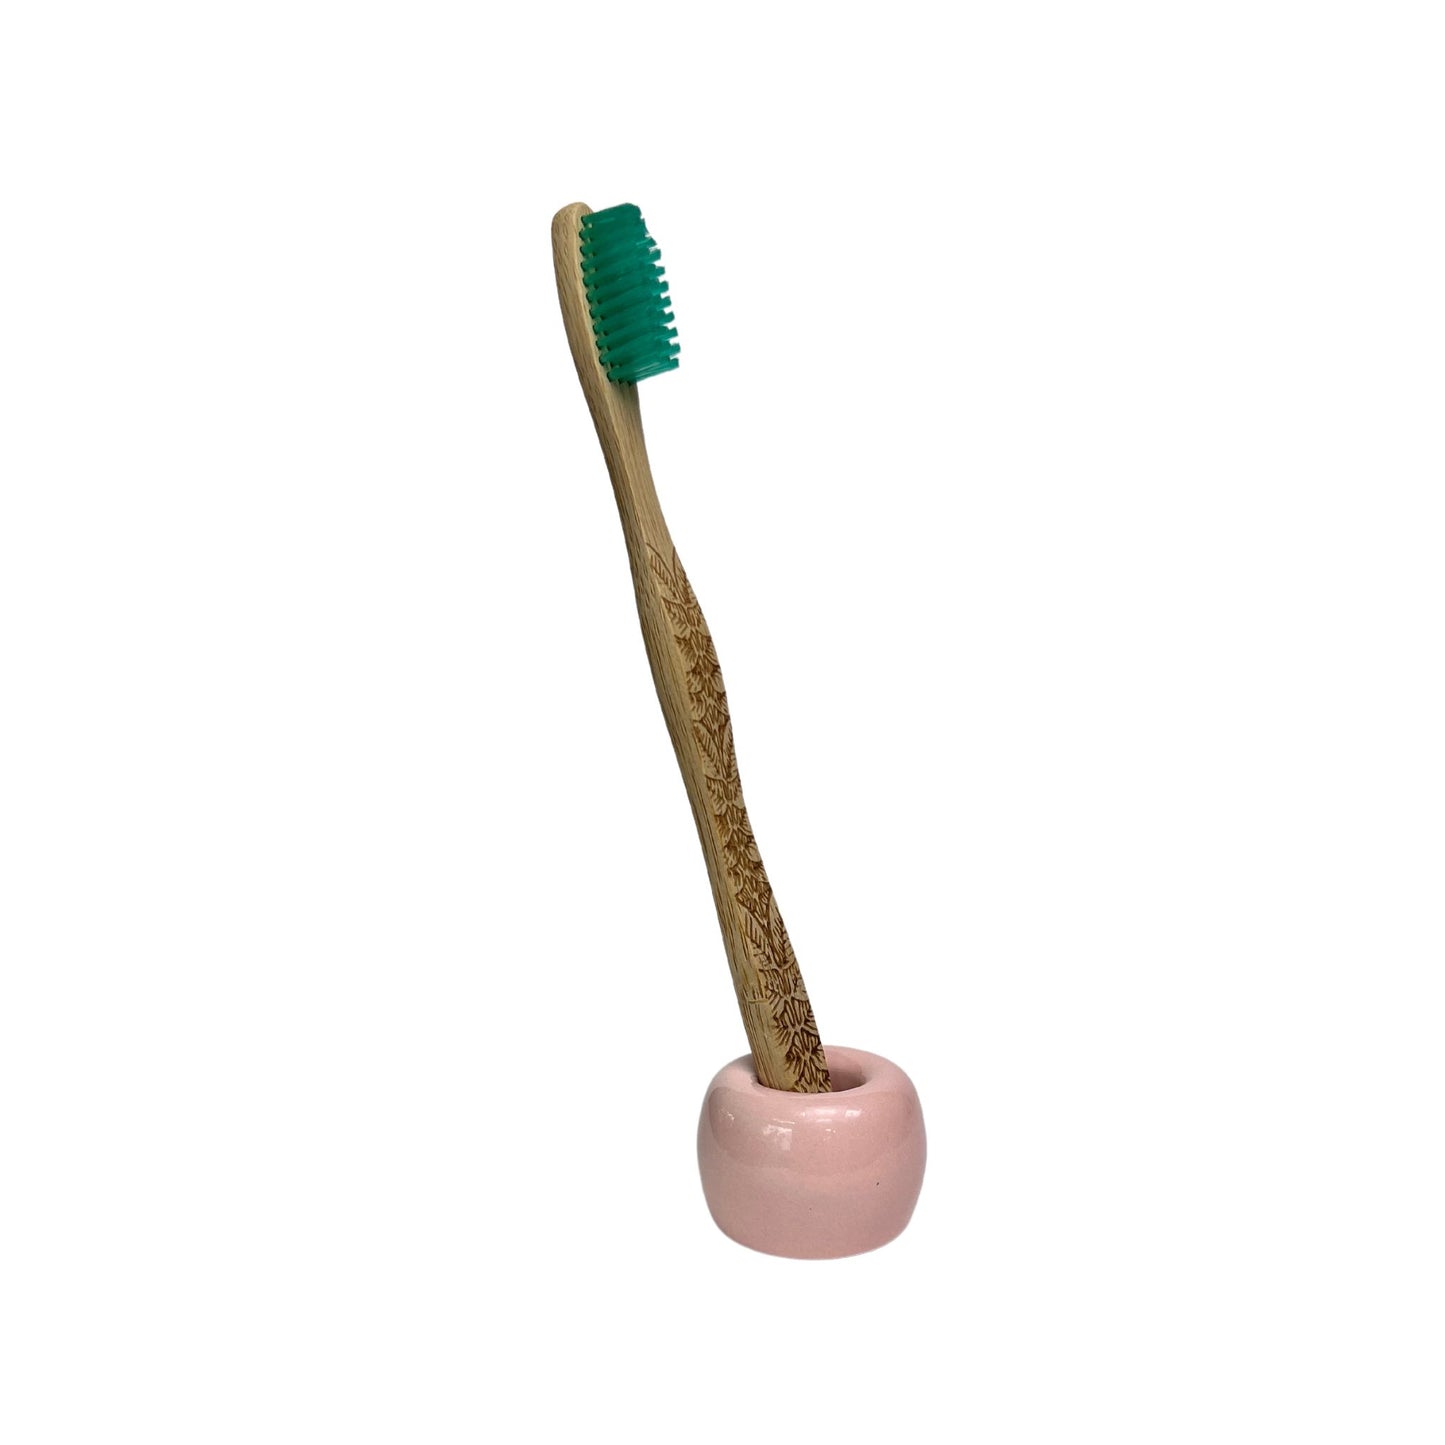 small ceramic toothbrush holder in glossy pink finish holding a bamboo toothbrush